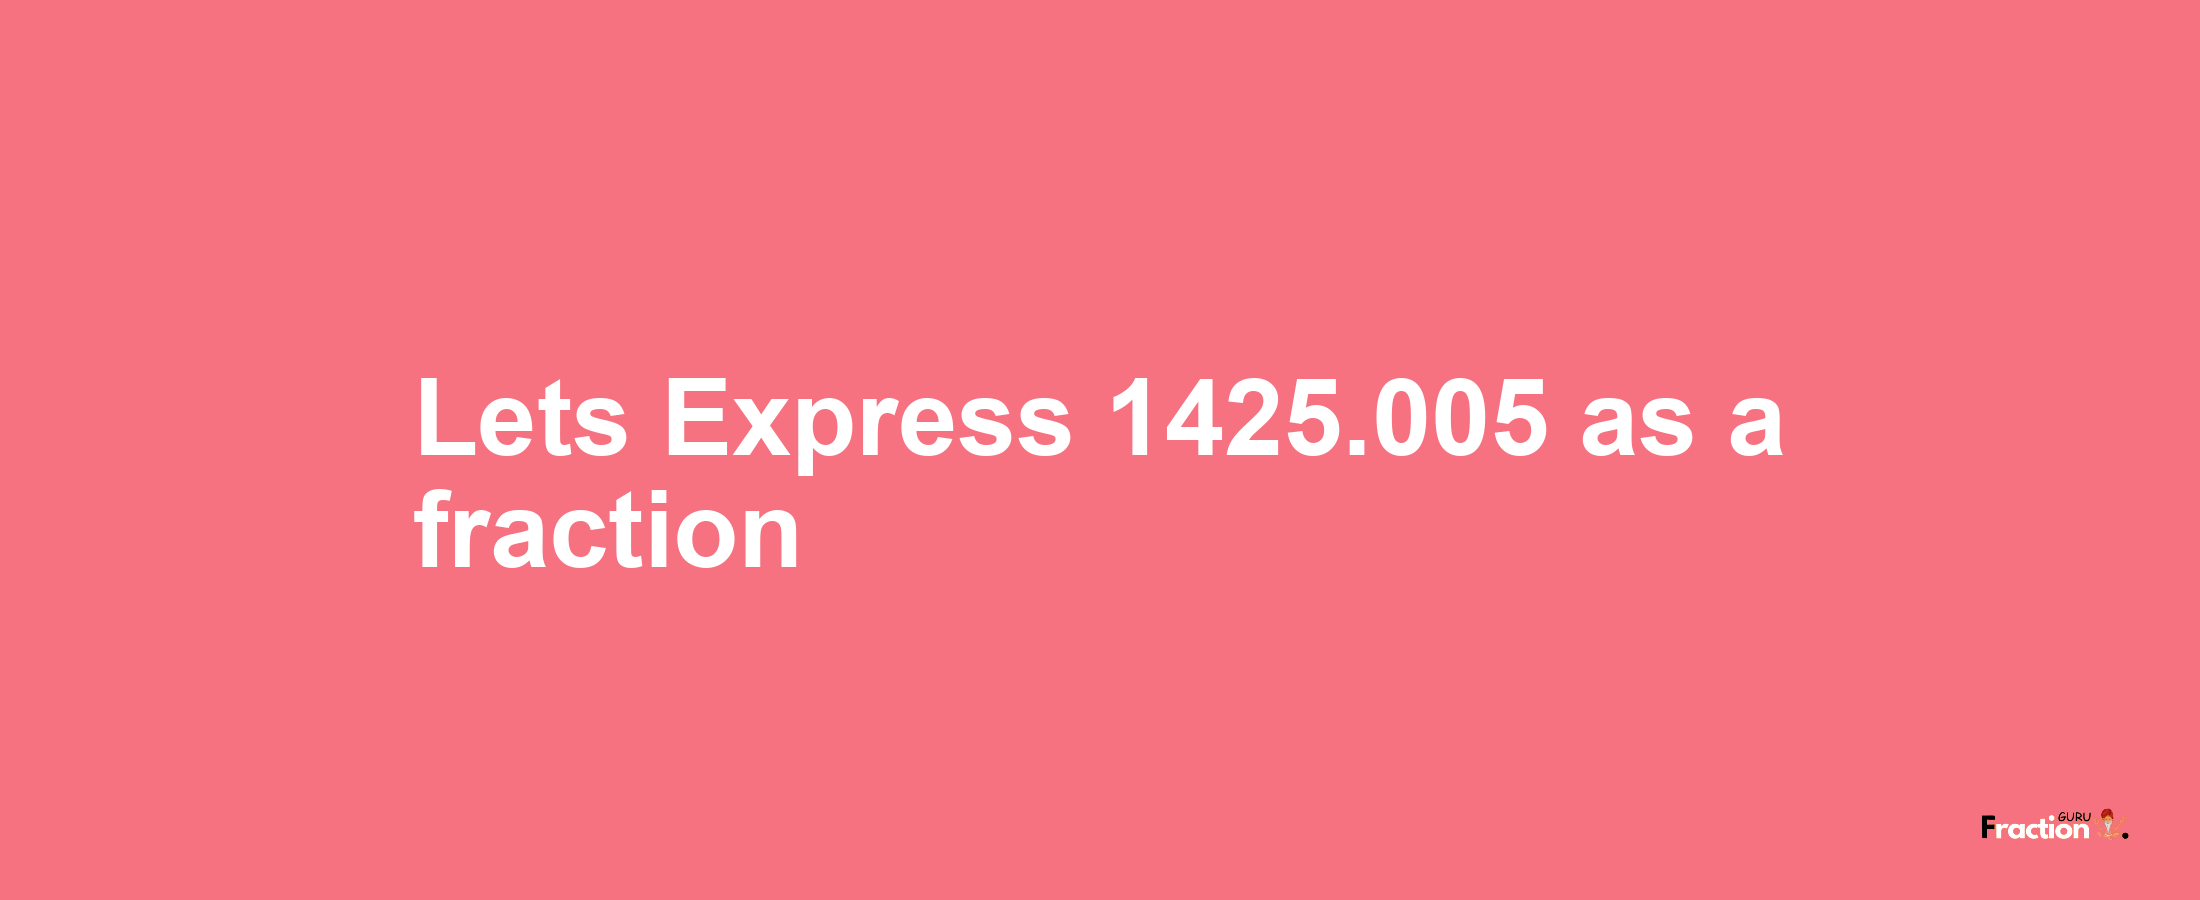 Lets Express 1425.005 as afraction